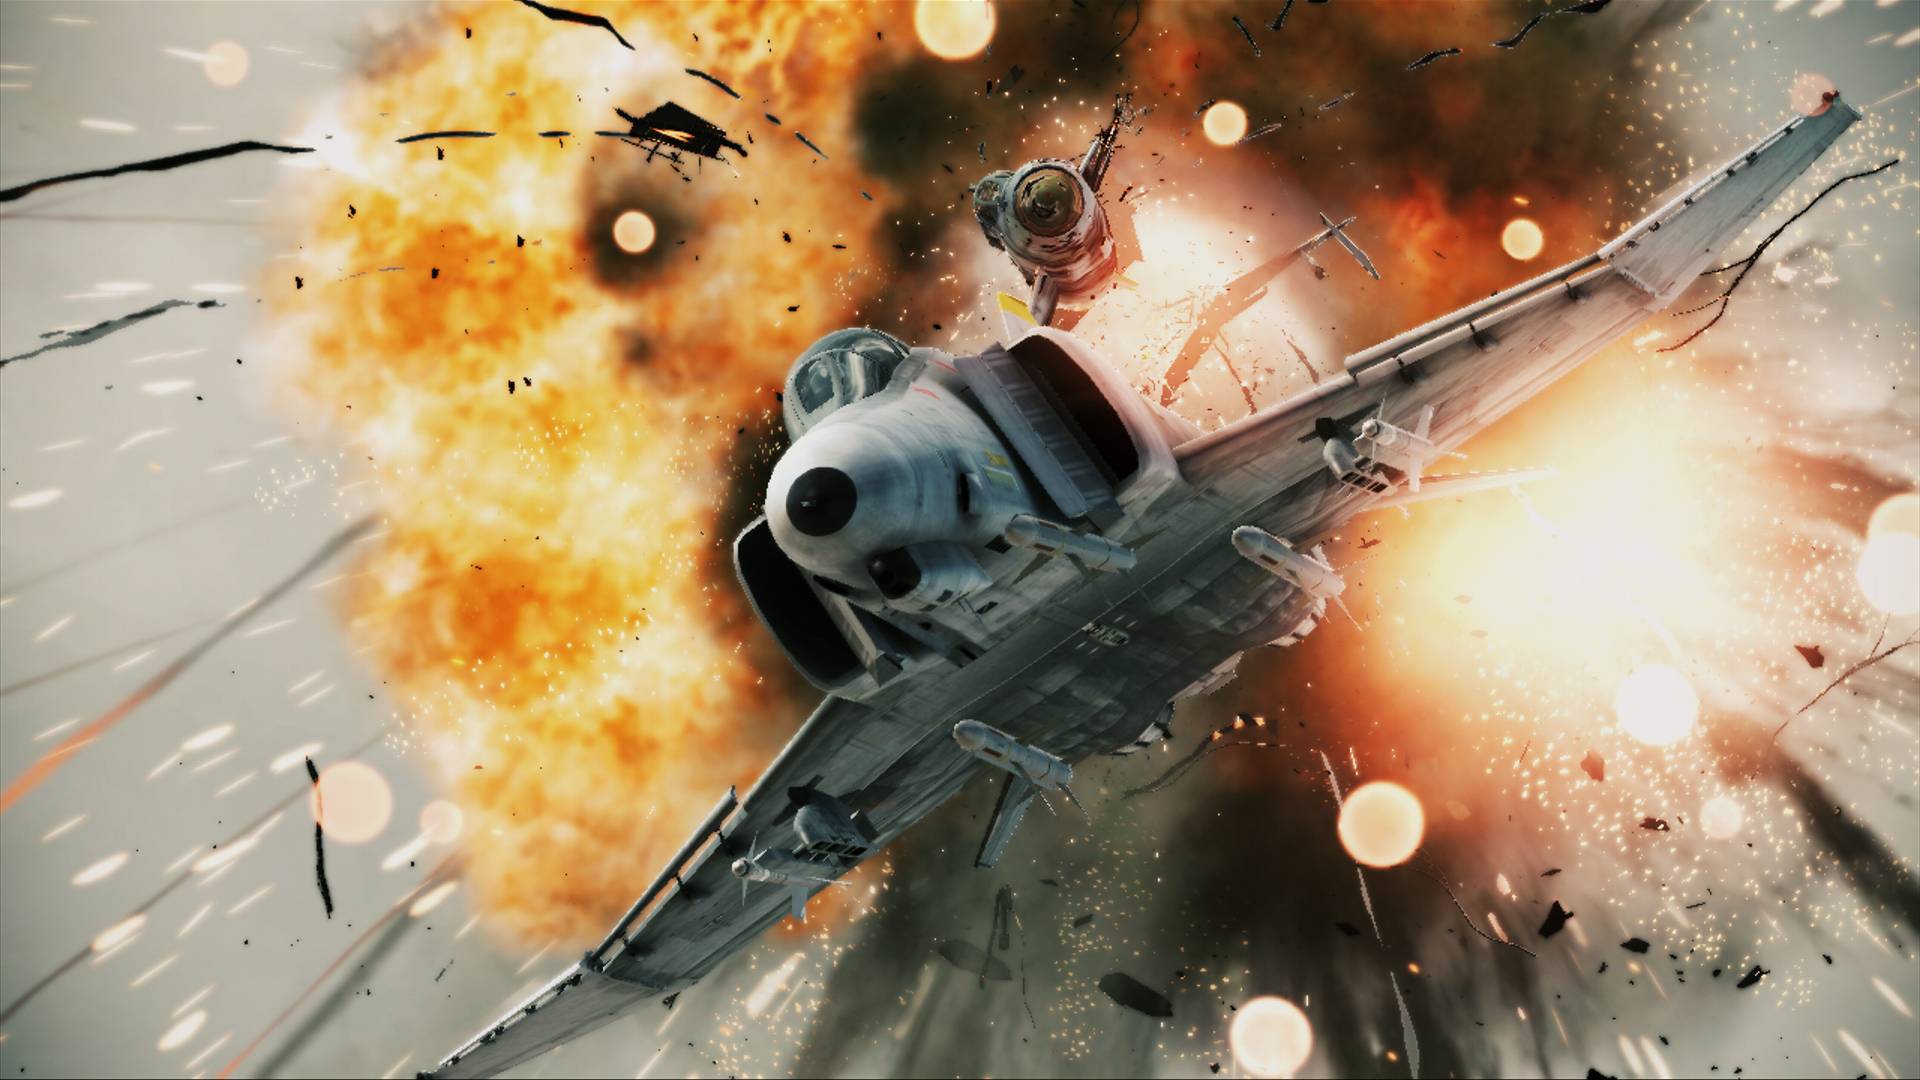 ace, Combat, Game, Jet, Airplane, Aircraft, Fighter, Plane, Military, Battle, Explosion, Fire Wallpaper